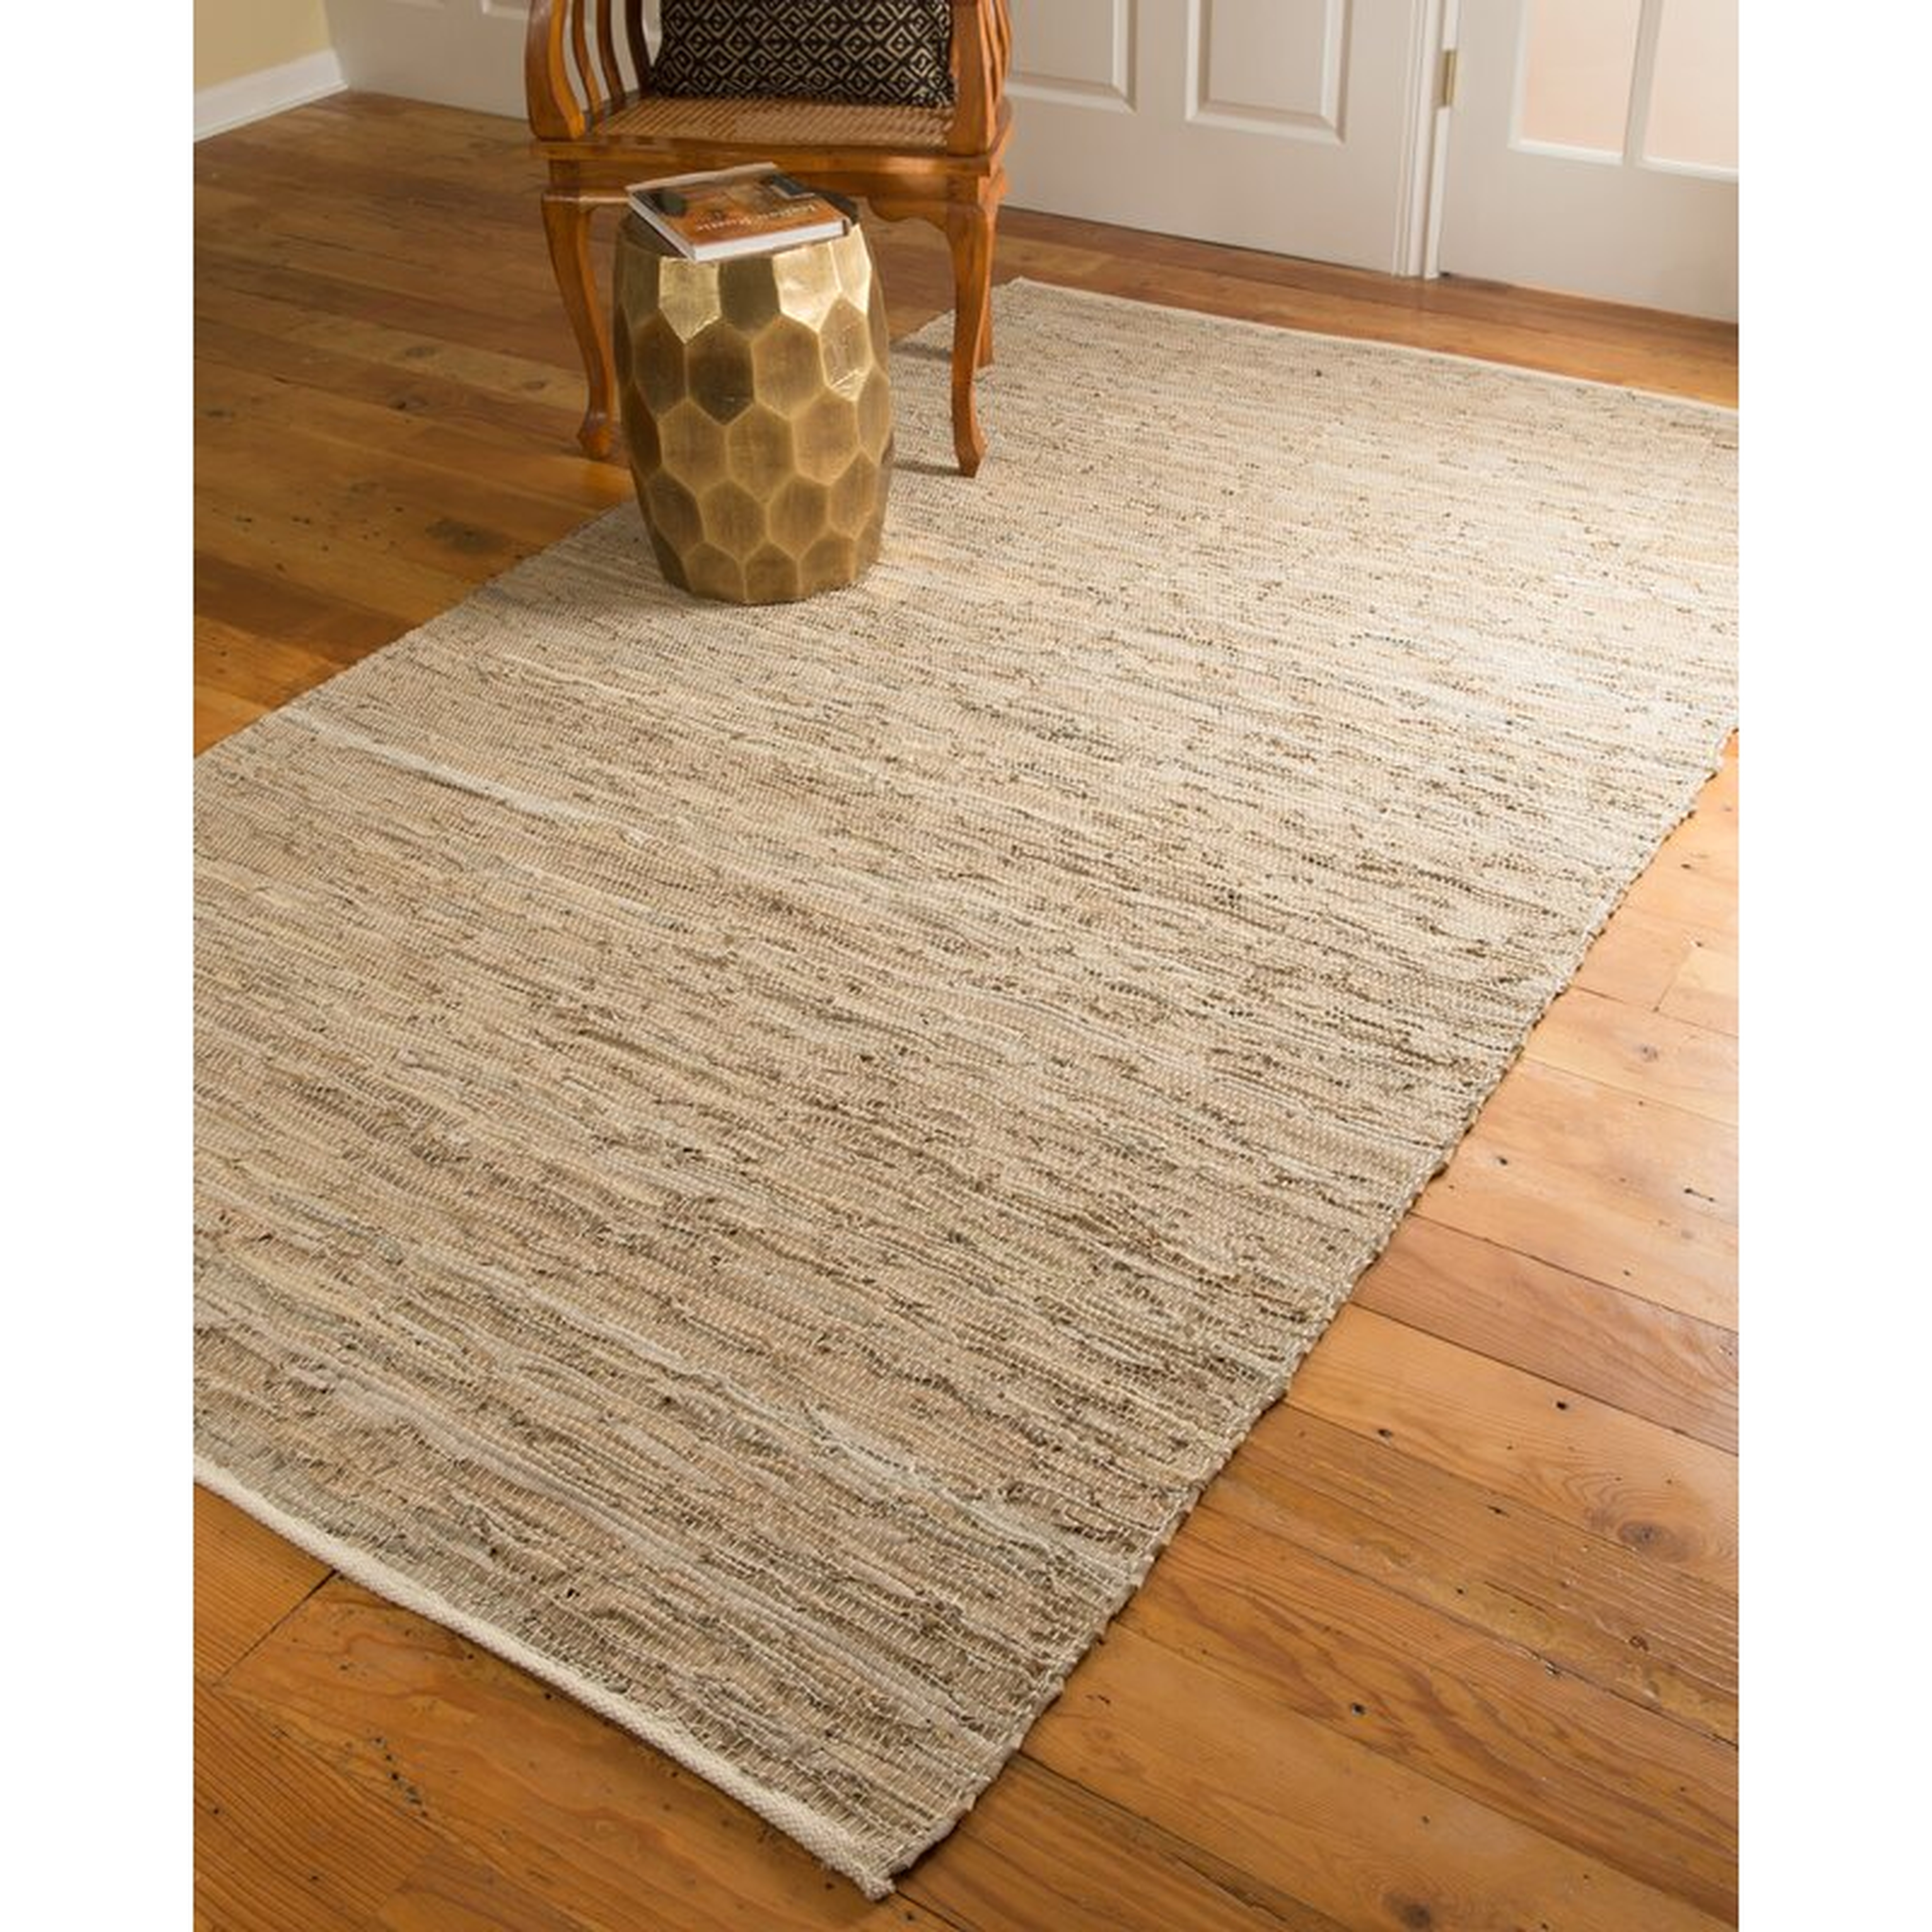 Out of Stock   Jeremy Beige Area Rug  Jeremy Beige Area Rug  Jeremy Beige Area Rug  Jeremy Beige Area Rug  Jeremy Beige Area Rug  Jeremy Beige Area Rug Try These Instead:  $93.99 784Rated 4.6 out of 5 stars.784 total votes Opens in a new tab  $128.99 5Rat - Wayfair